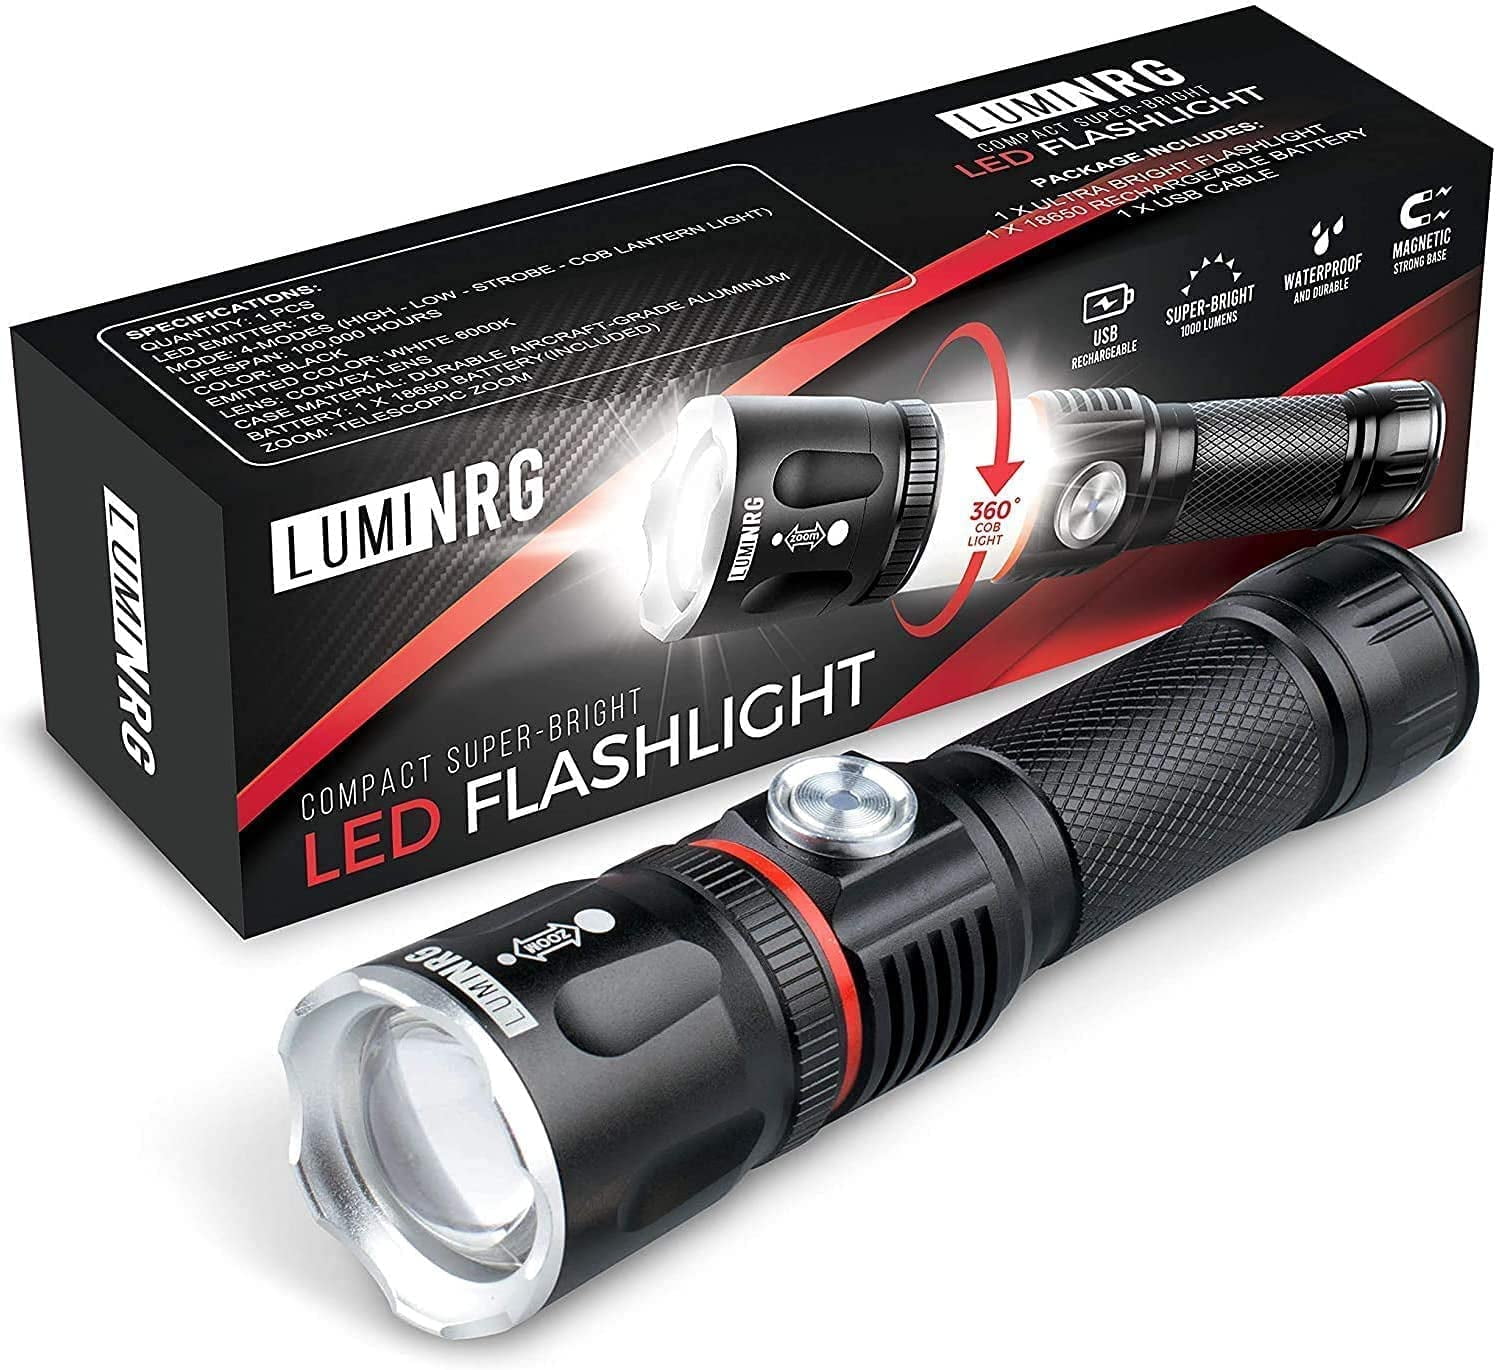 overskud forfængelighed Kæreste LumiNRG Tactical Flashlight Rechargeable High Powered 1000 Lumens LED Light  - Zoomable, 4 Modes with COB Lantern Mode - Magnetic Base, Waterproof  Ultra-Bright for Police, Emergency, Work, Hiking - Walmart.com